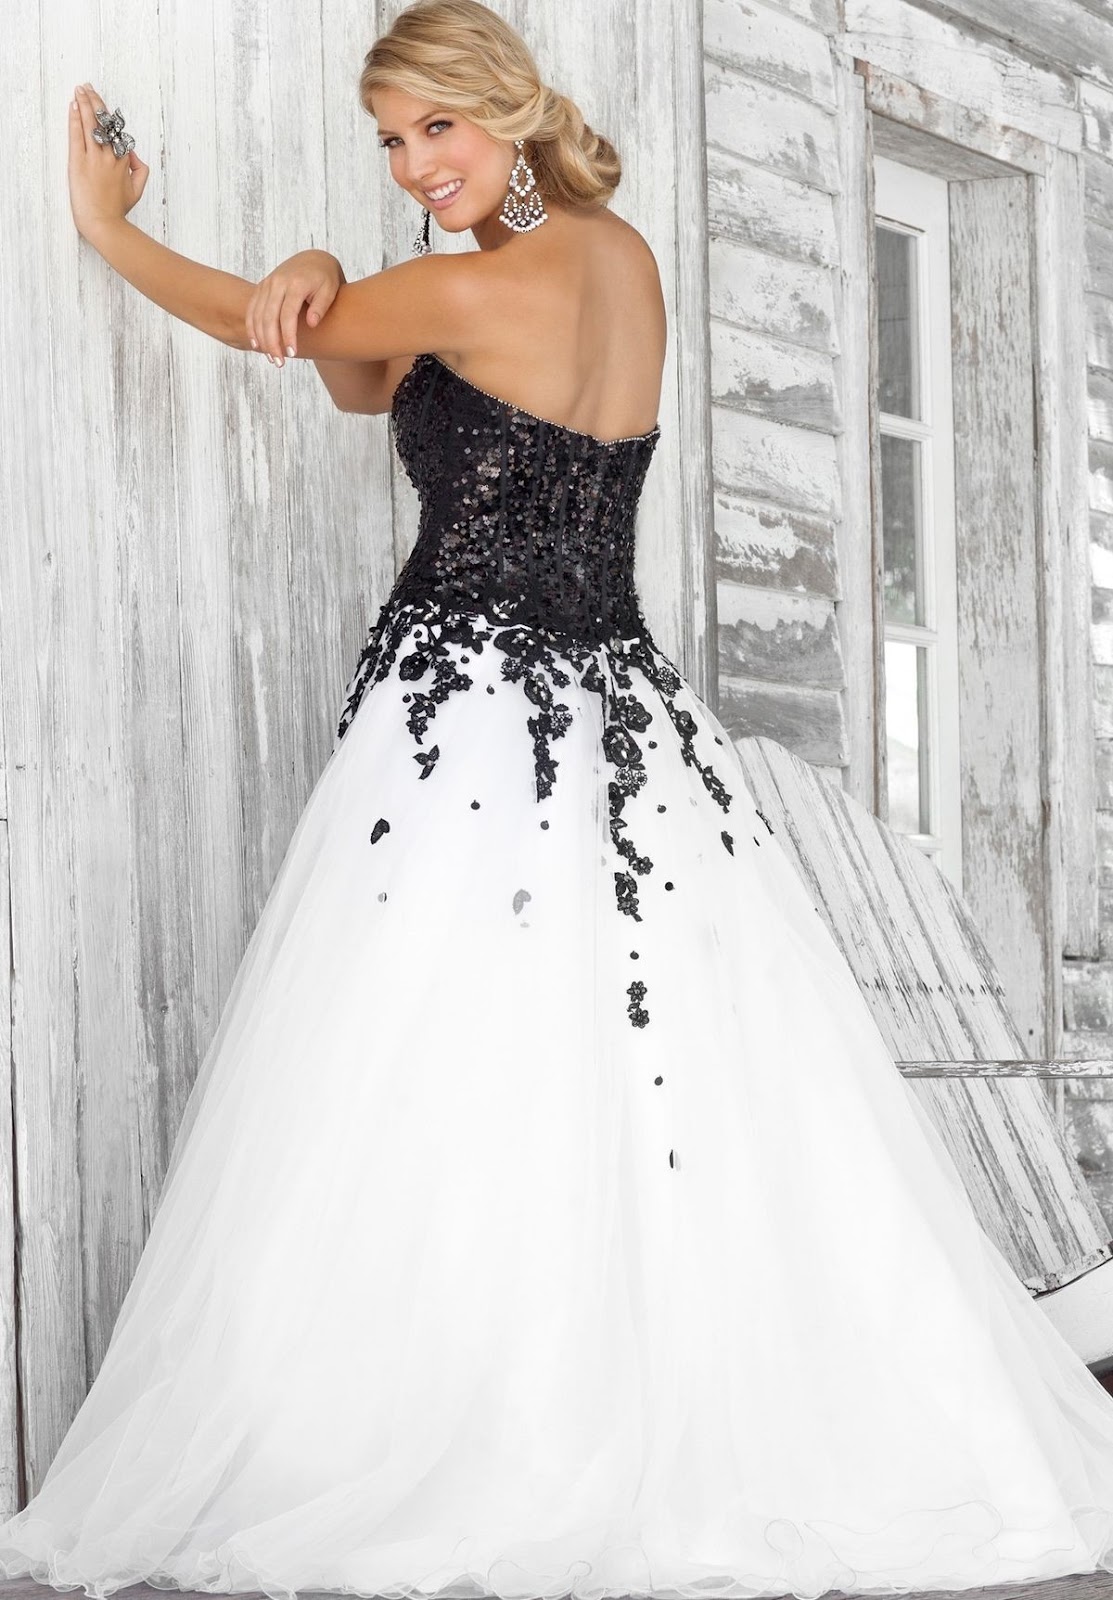 strapless wedding dresses plus size  prom/2488-organza-strapless-sweetheart-ball-gown-long-prom-dress.html